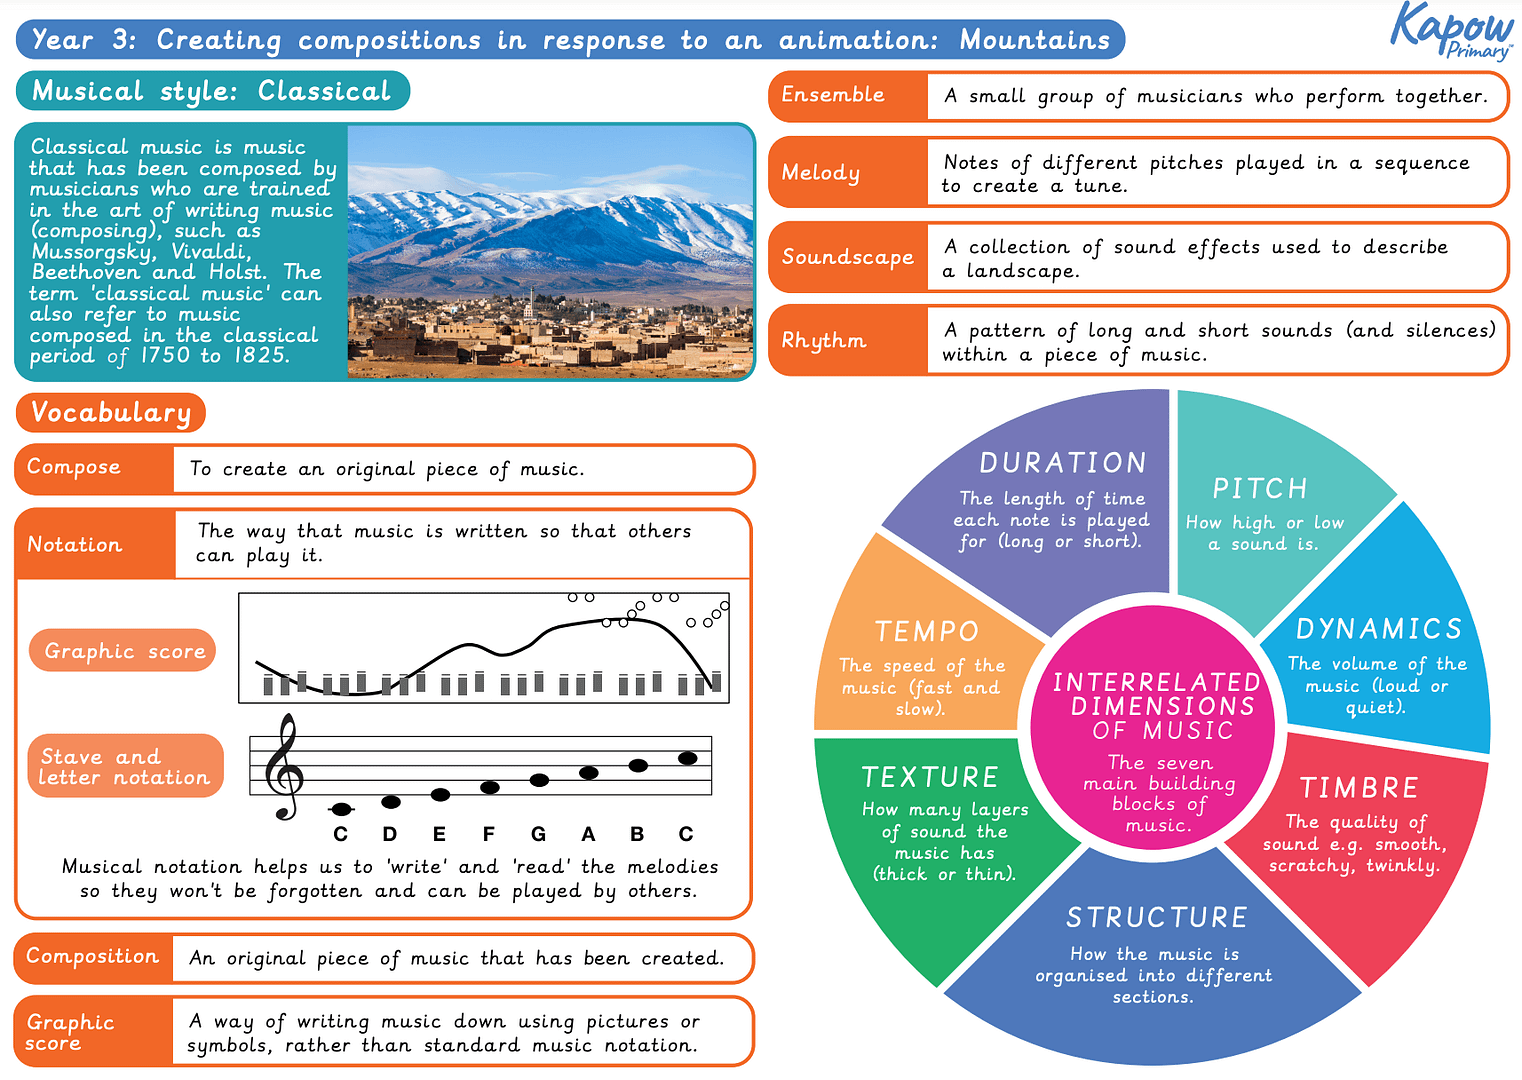 Knowledge organiser: Music – Y3 Creating compositions in response to an animation (Mountains)